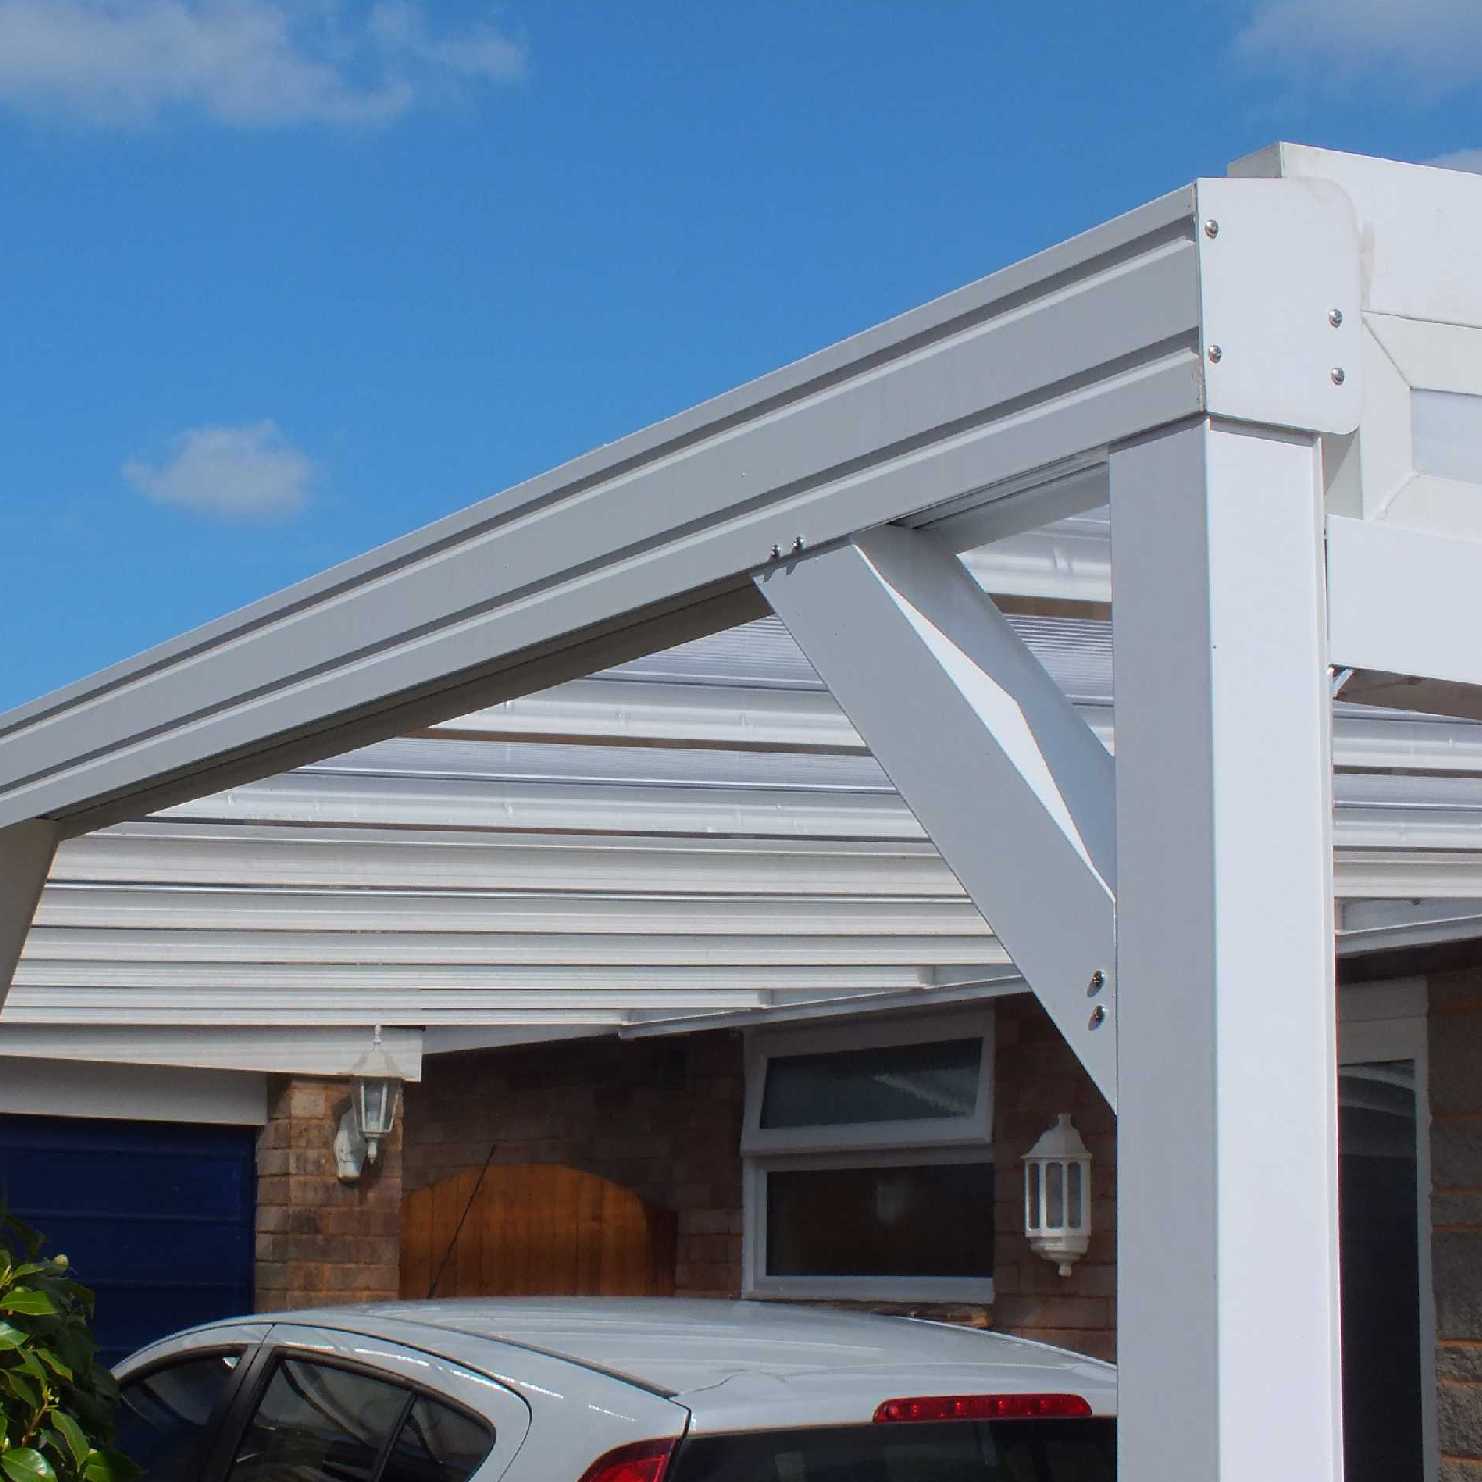 Great deals on Omega Smart Lean-To Canopy, White with 16mm Polycarbonate Glazing - 5.2m (W) x 1.5m (P), (3) Supporting Posts